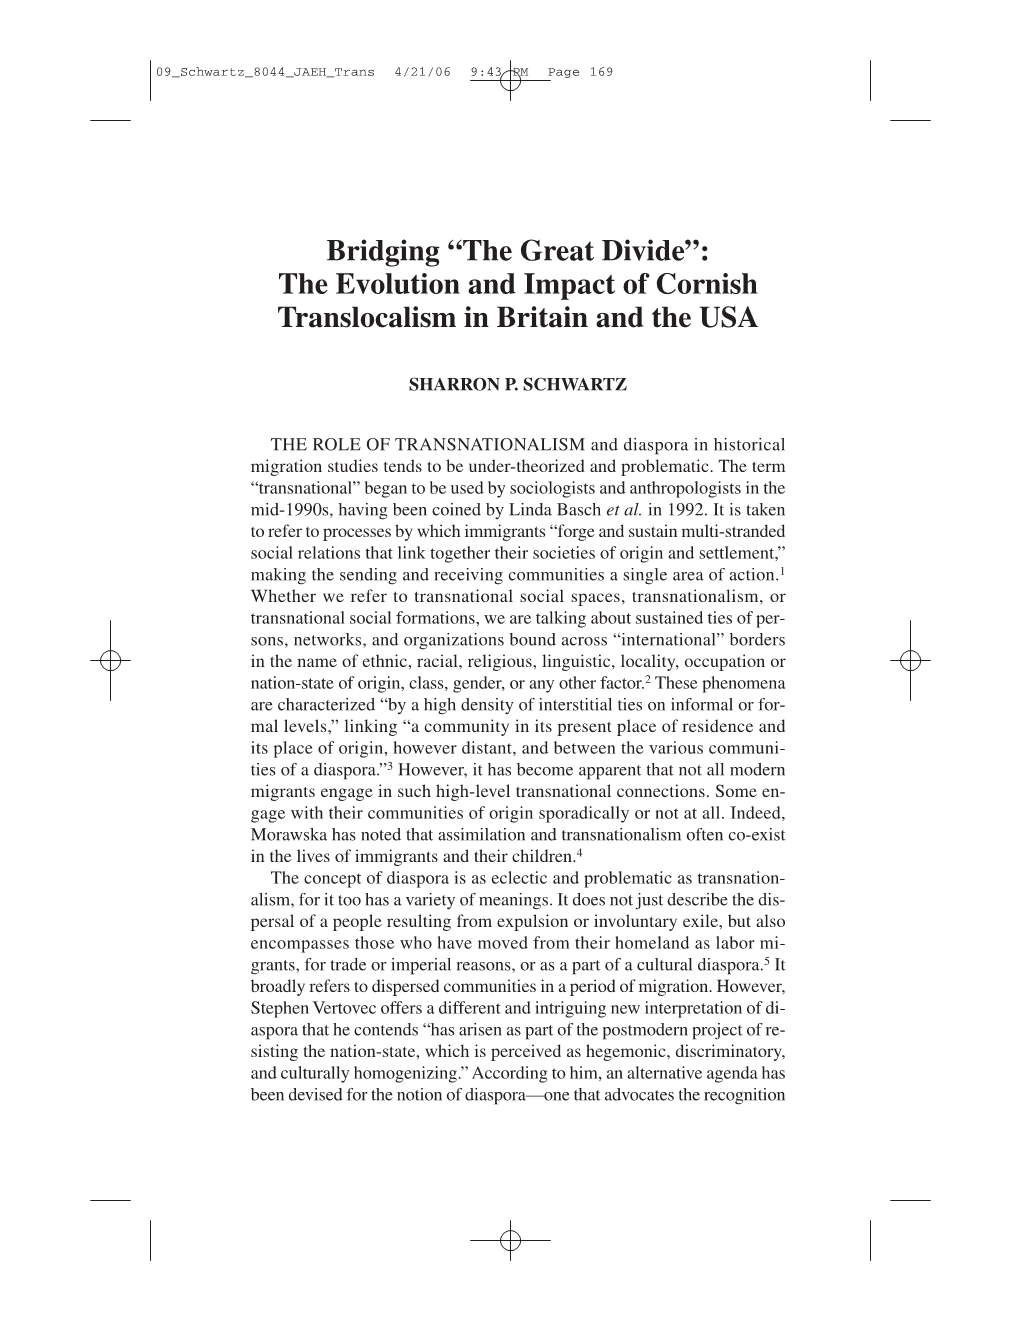 The Evolution and Impact of Cornish Translocalism in Britain and the USA